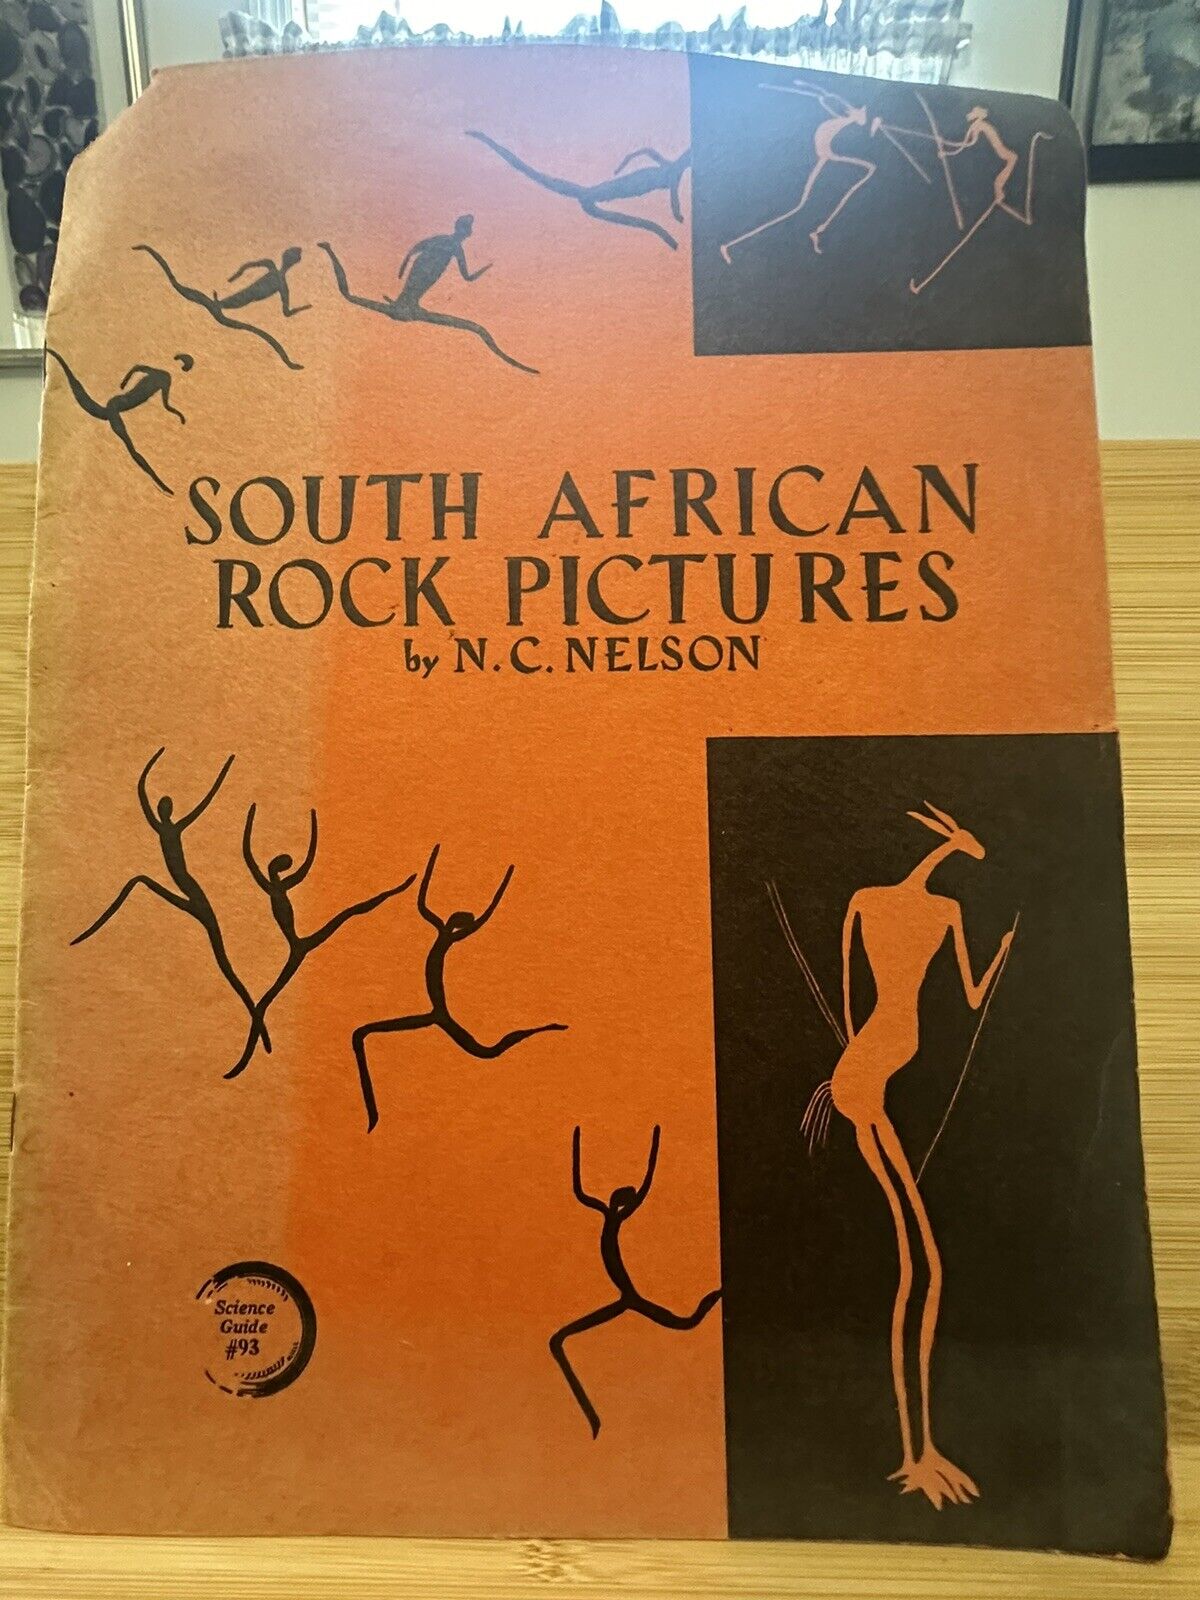 South African Rock Pictures 1937 American Museum of Natural History